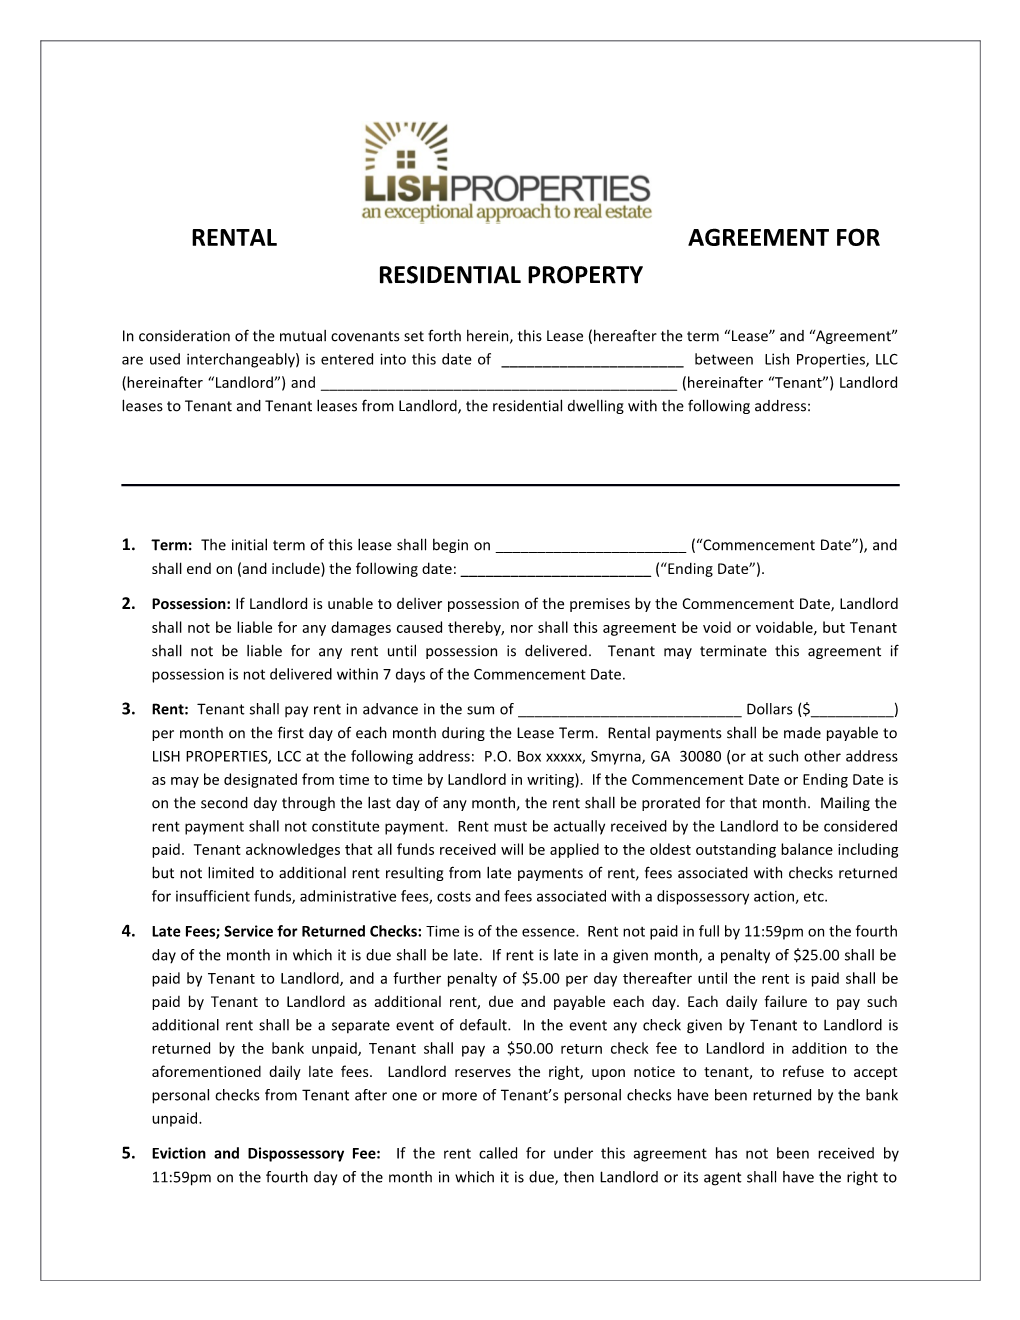 Rental Agreement for Residential Property